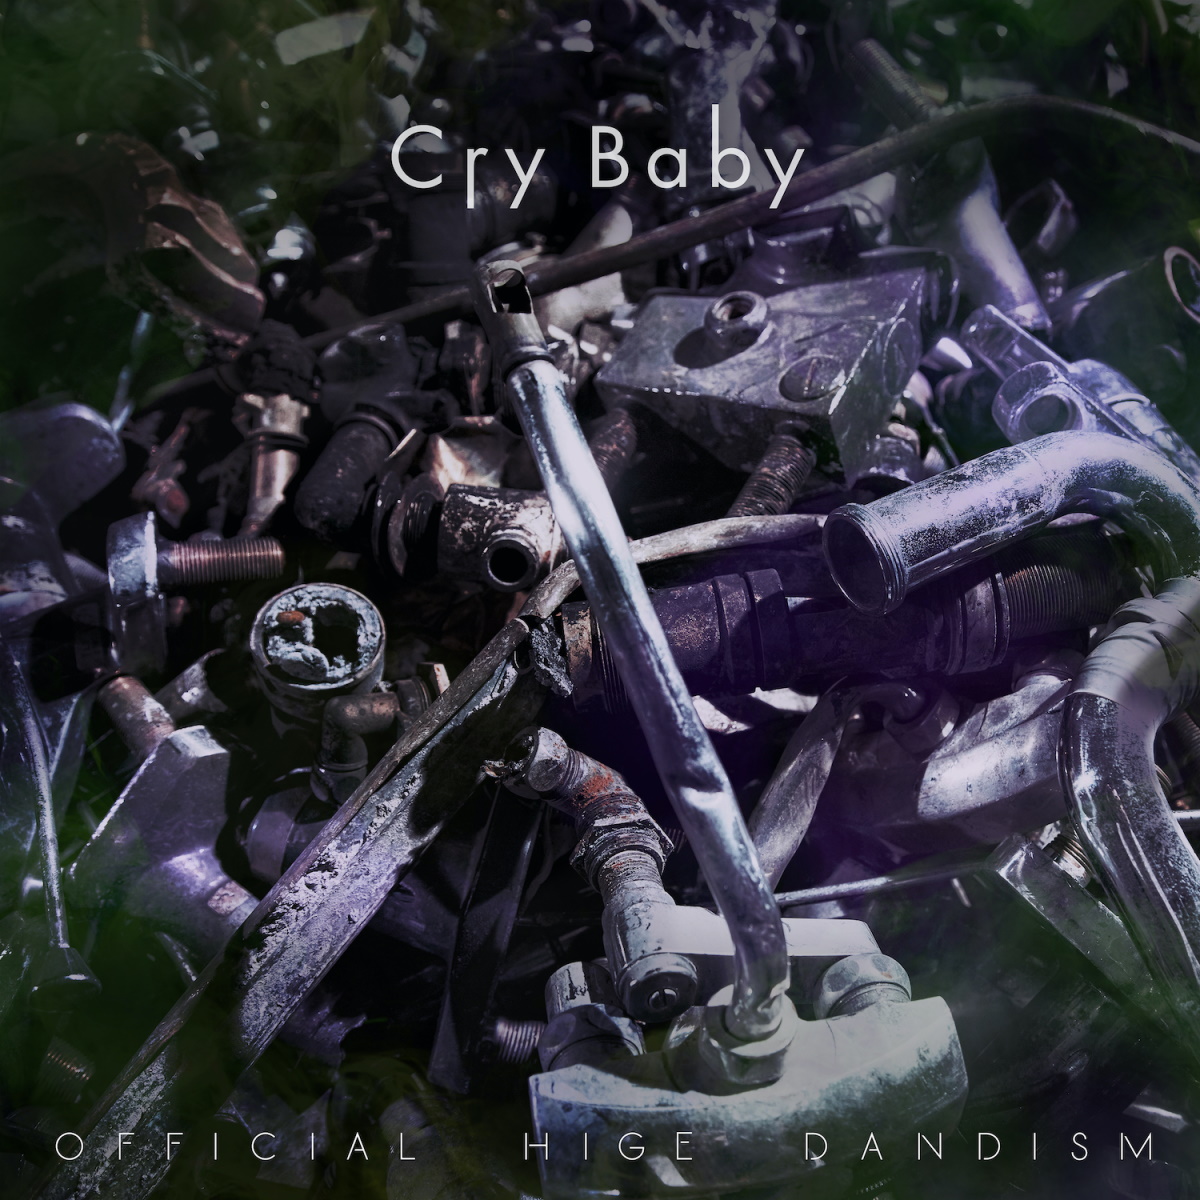 Cover art for『Official HIGE DANdism - Cry Baby』from the release『Cry Baby』